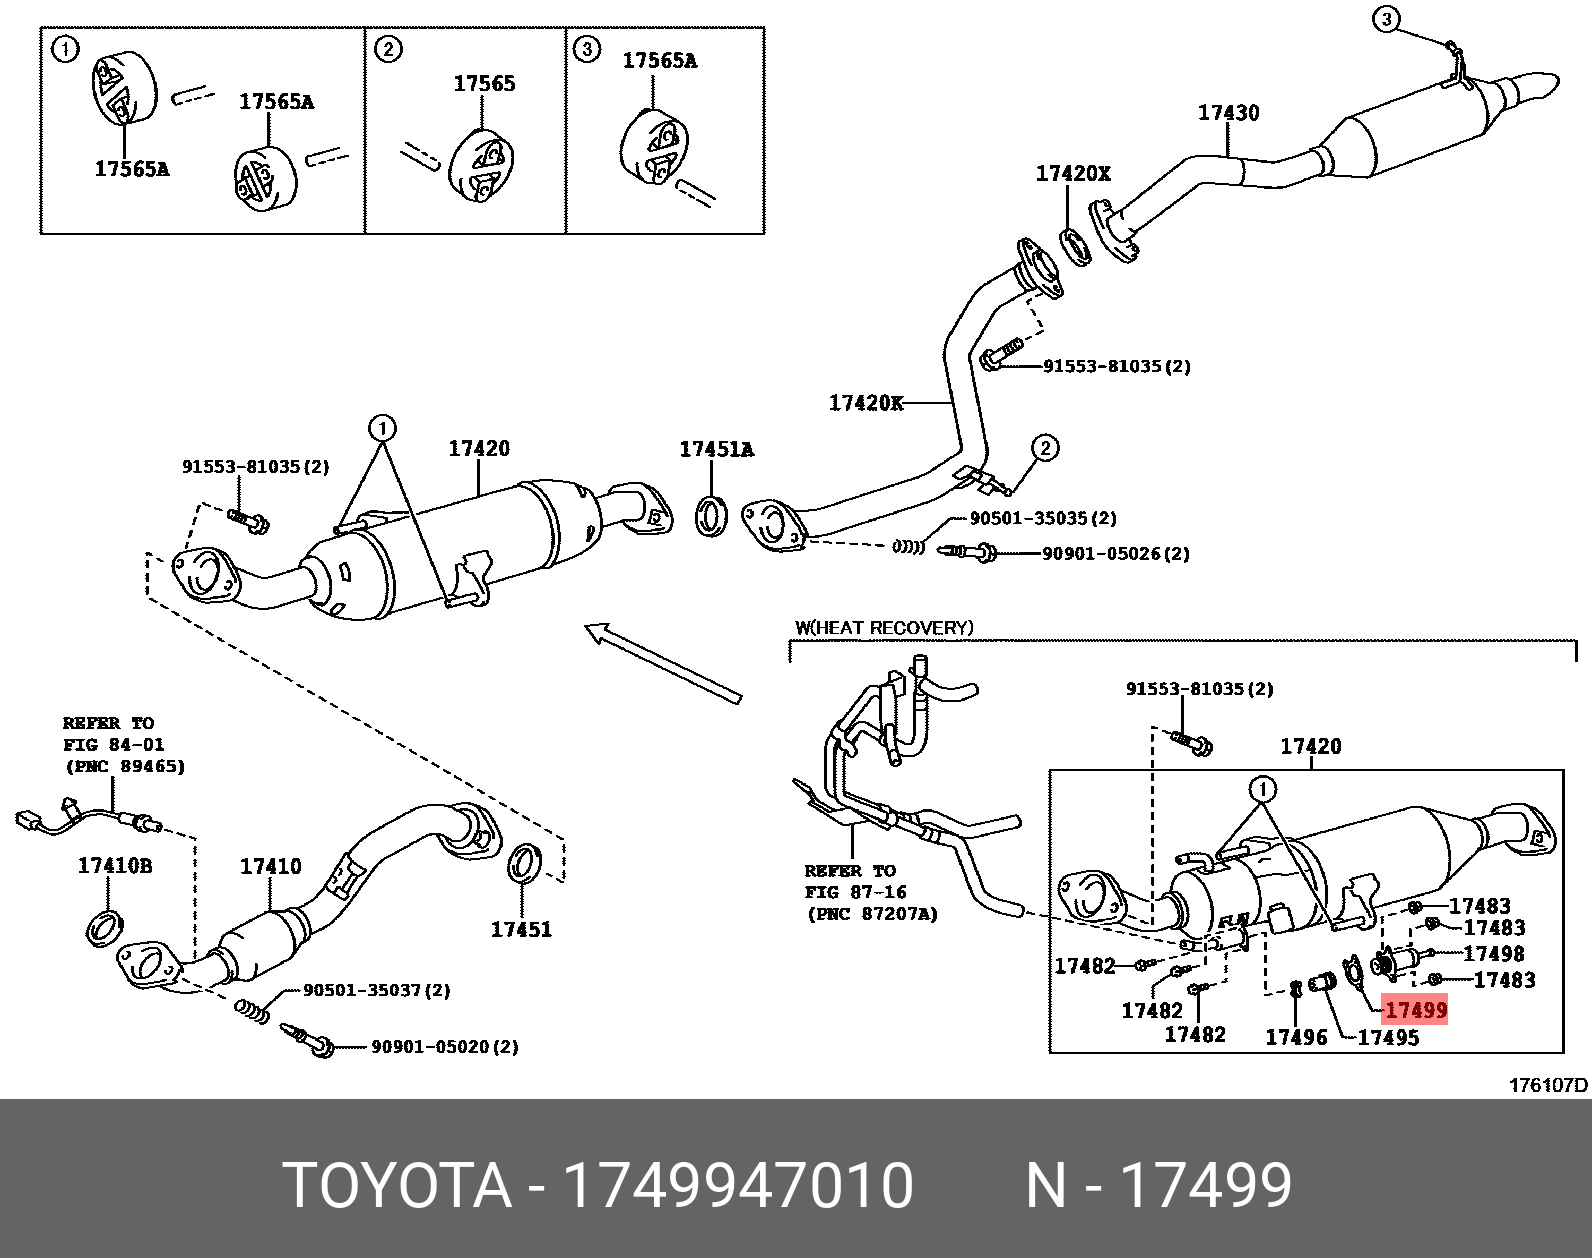 PRIUS (PLUG-IN HBD) 201201 - 201604, GASKET, EXHAUST PIPE GAS CONTROL ACTUATOR